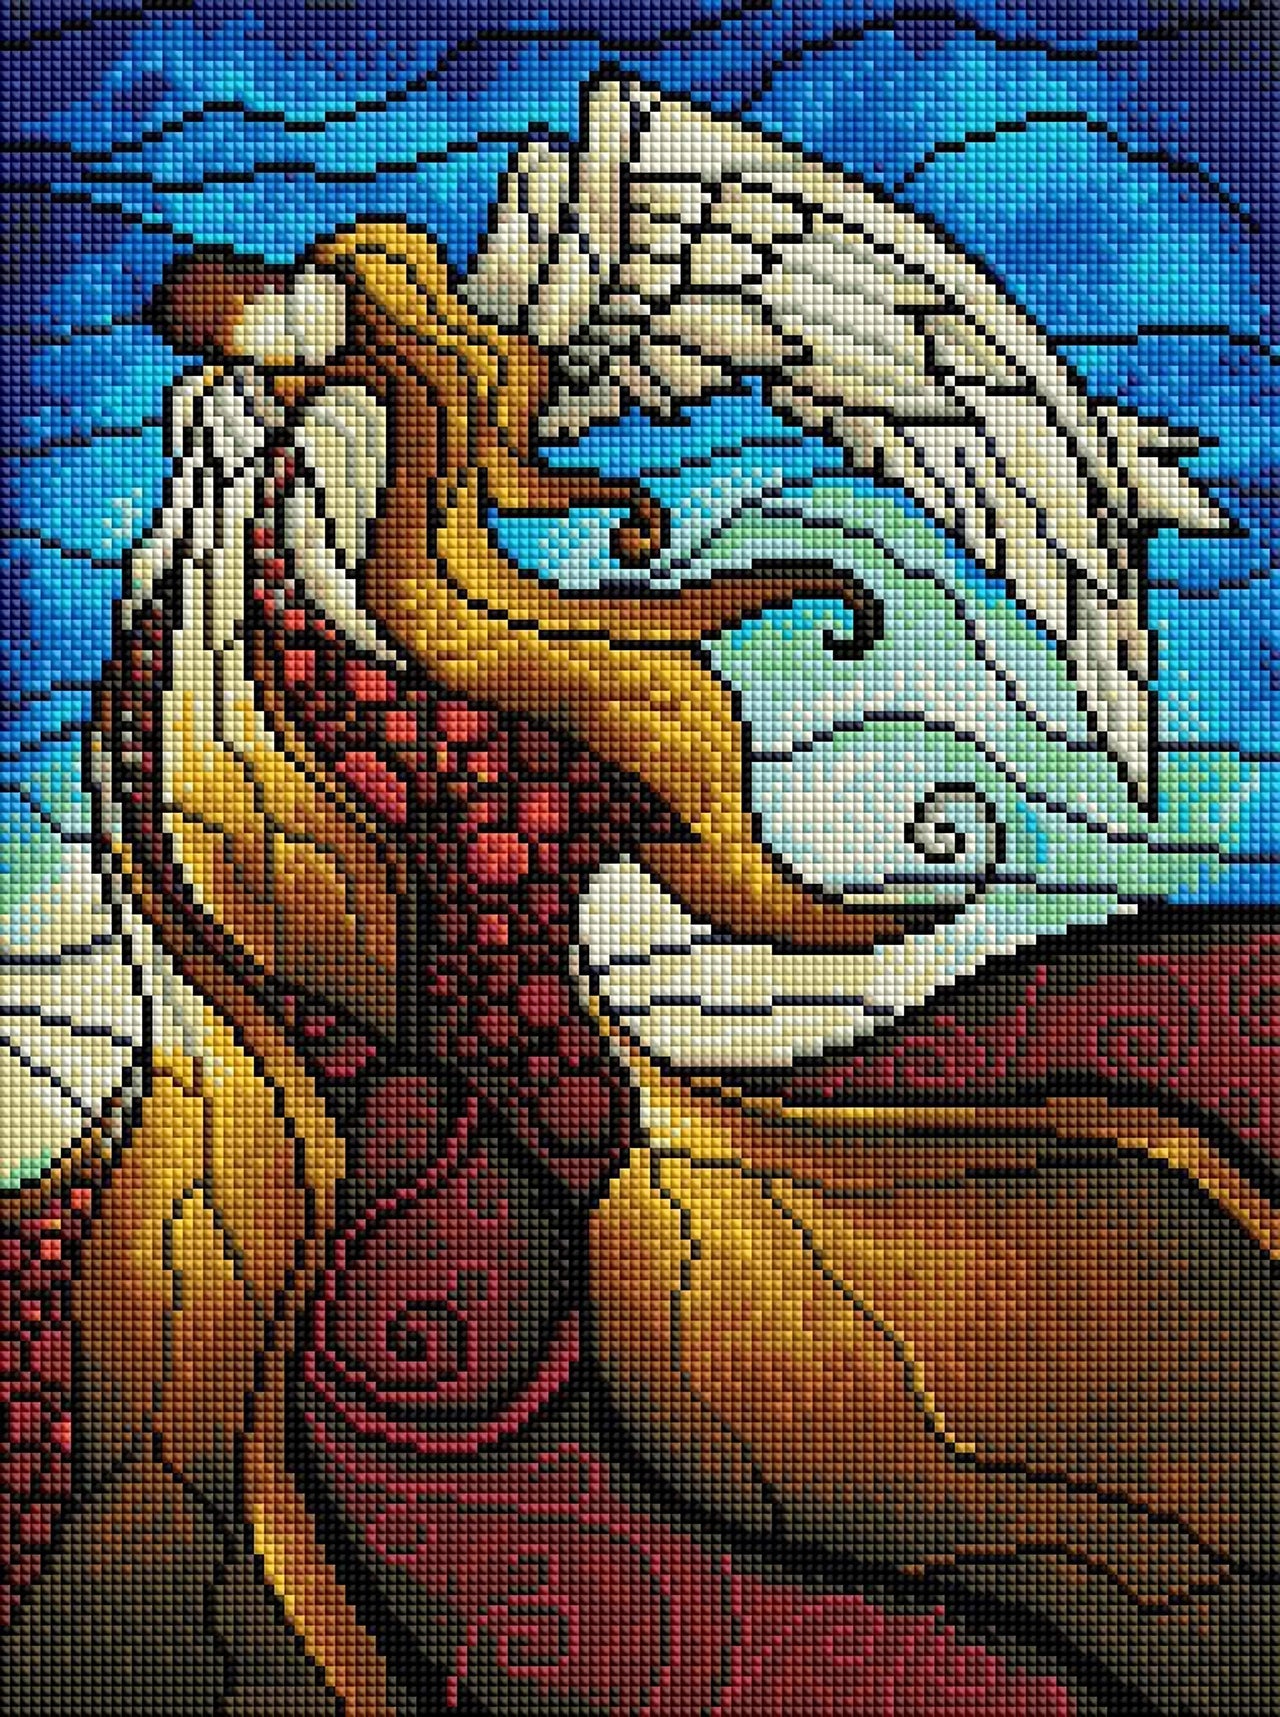 Diamond Painting In The Arms Of The Angel 12.6″ x 16.9″ (32cm x 43cm) / Square with 27 Colors / 21,294